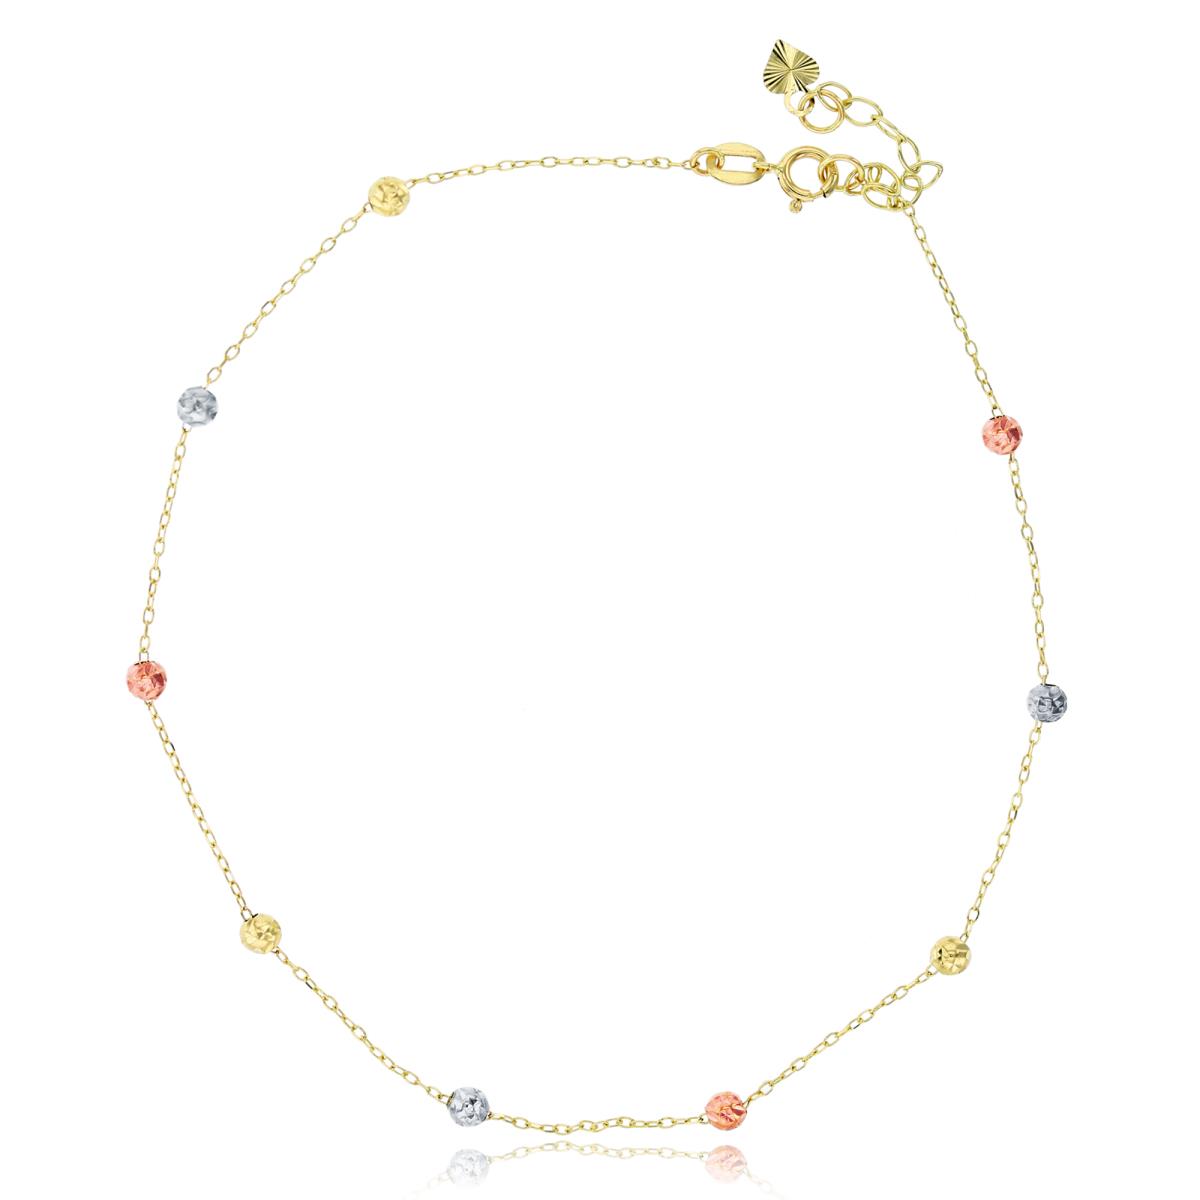 14K Tricolor Gold Cable Chain with Star DC Beads & Swiss DC Heart Drop 9+1" Anklet